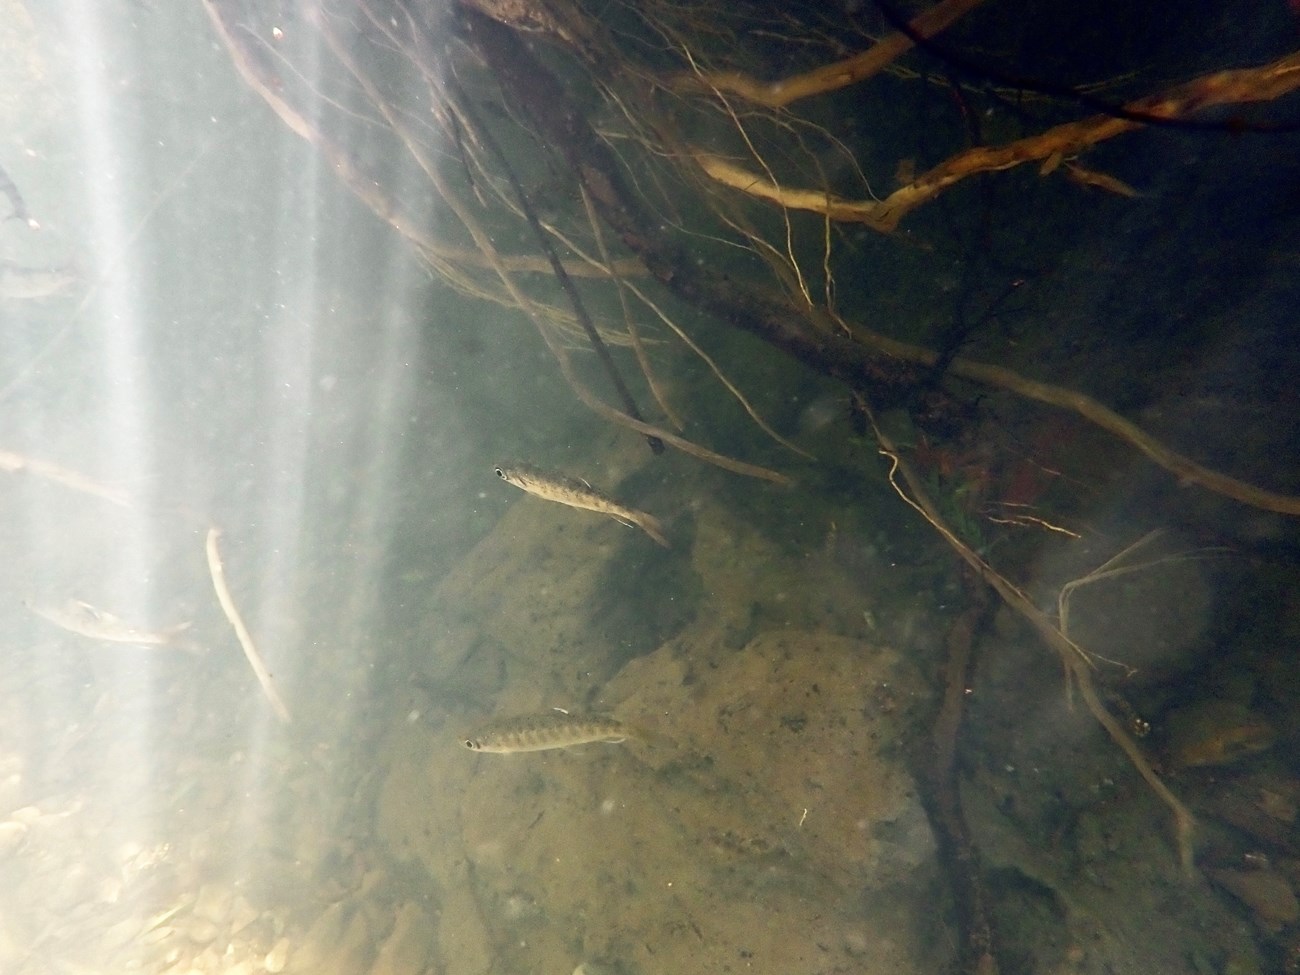 Underwater image of three juvenile salmon swimming in a deep pool between rays of sunlight and exposed roots in Redwood Creek.